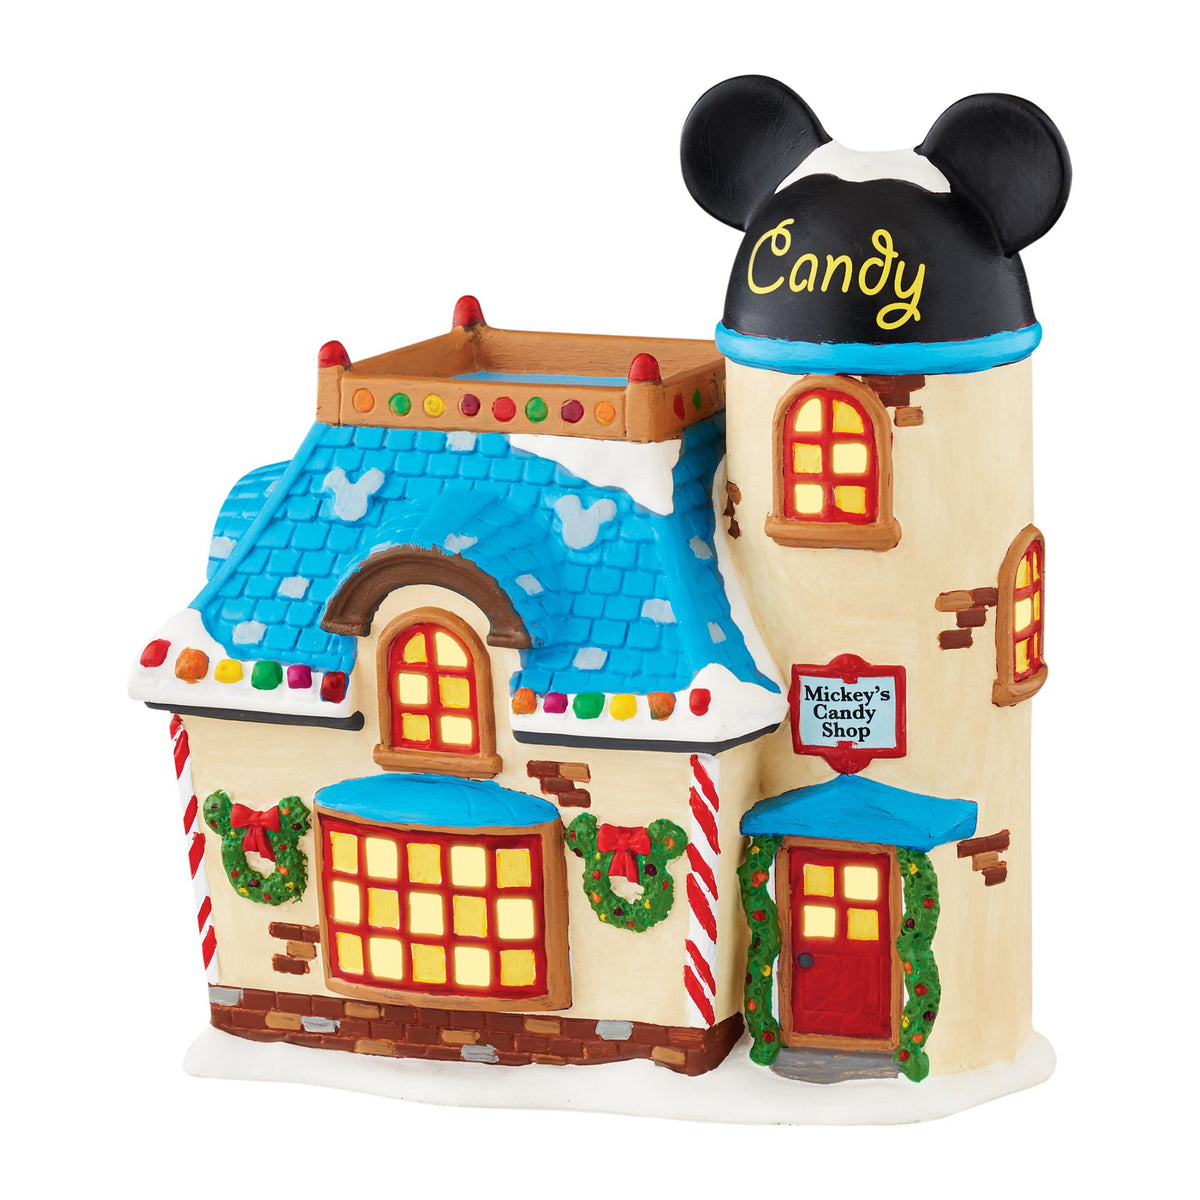 6315874675 - mickeyundco Your Disney Shop Store in Germany